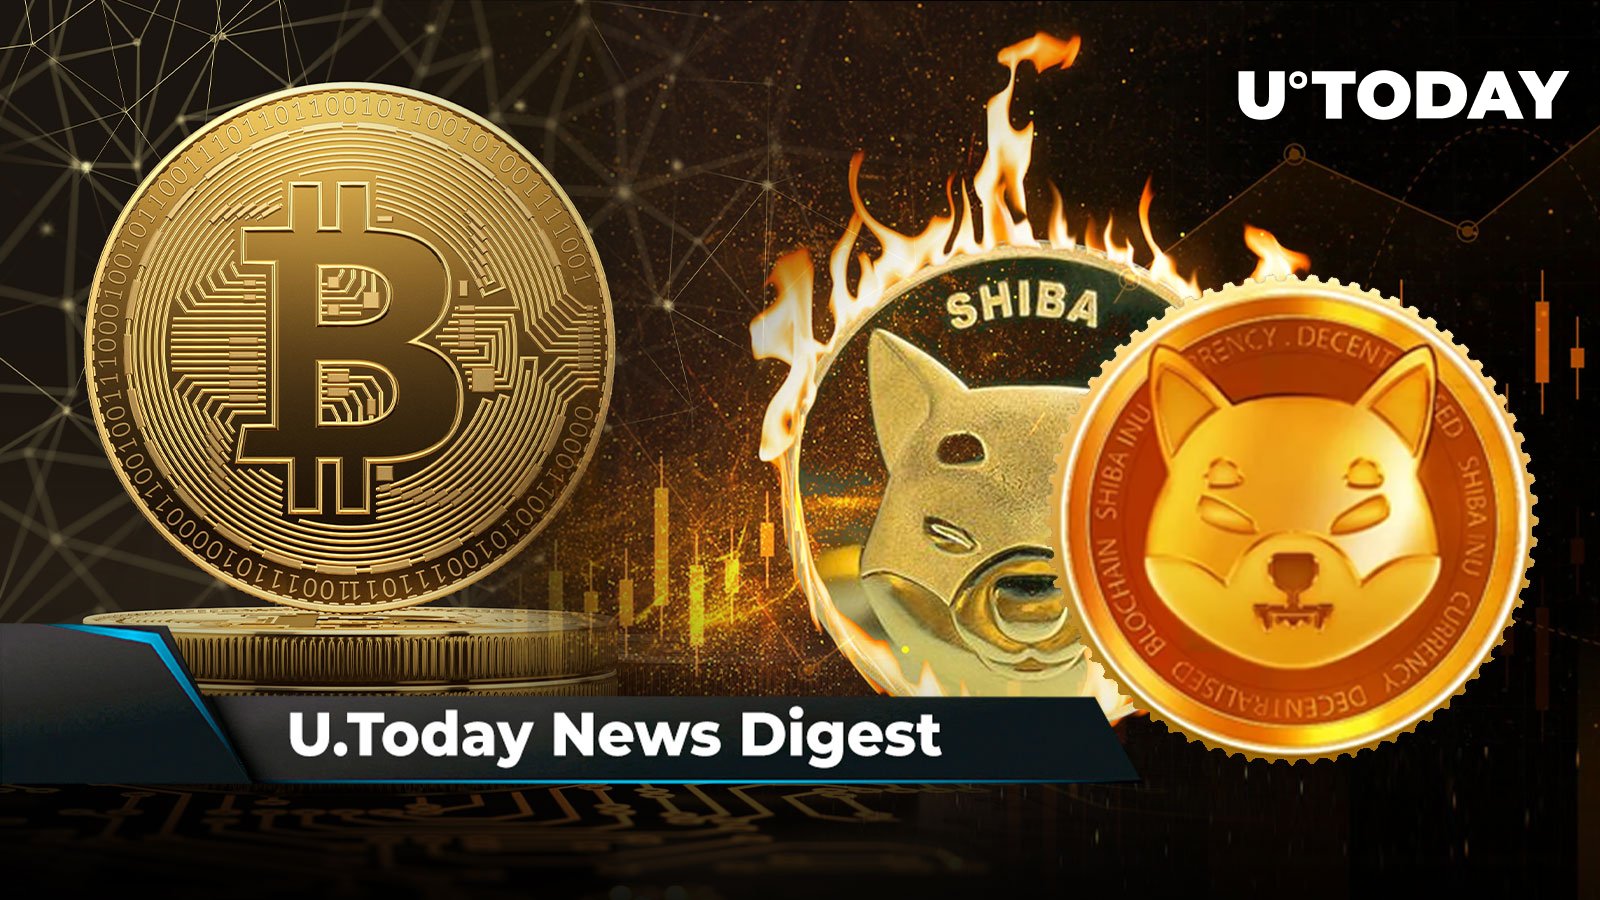 BTC Jumps Back Above ,000, FLR Tokens Airdropped to XRP Holders, Trillions of SHIB to Be Burned Once Shibarium Launches: Crypto News Digest by U.Today